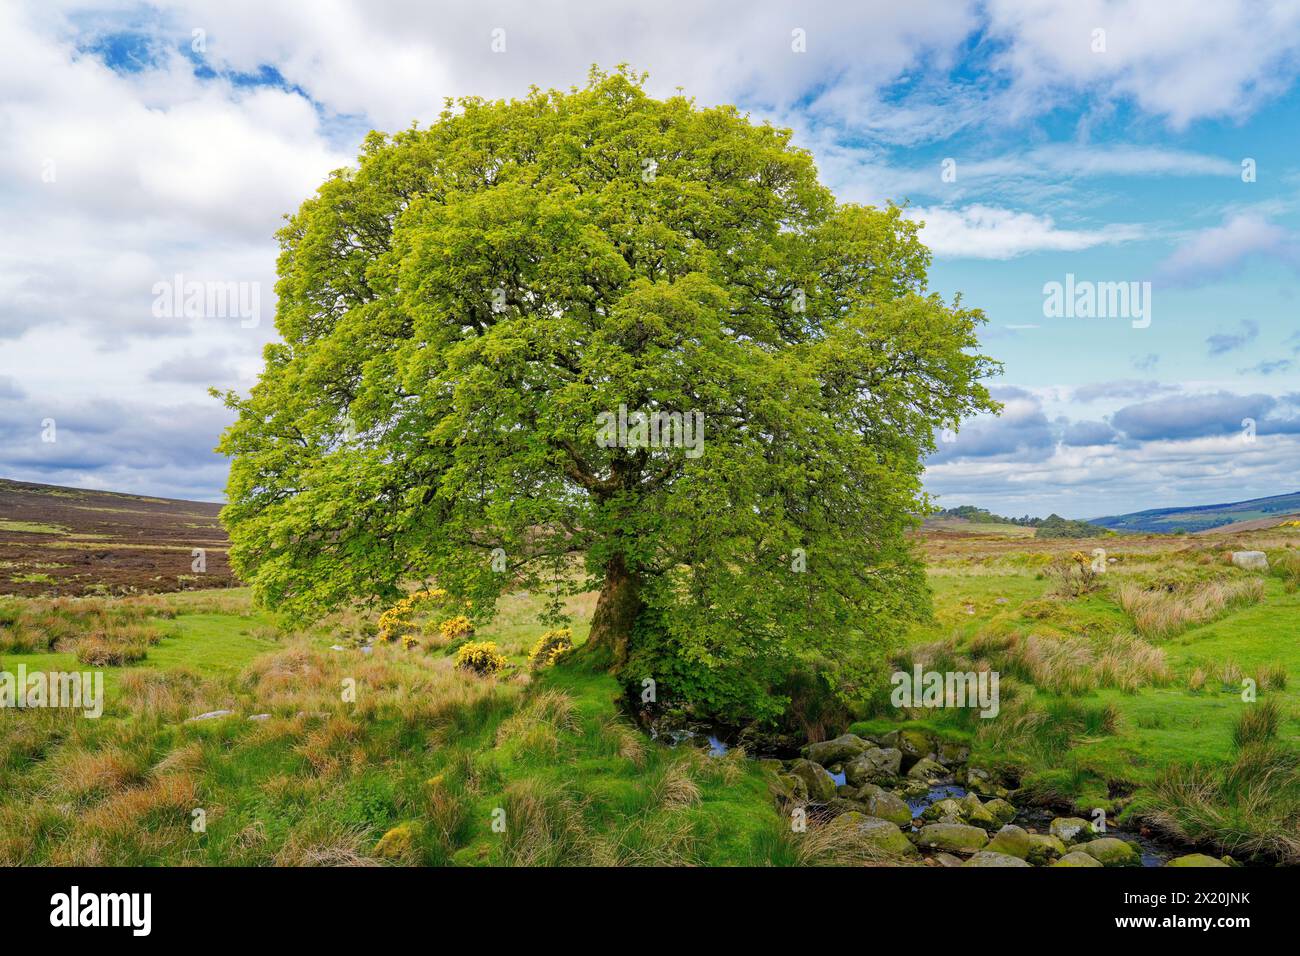 Ireland, County Wicklow, green tree in the Wicklow Mountains Stock Photo